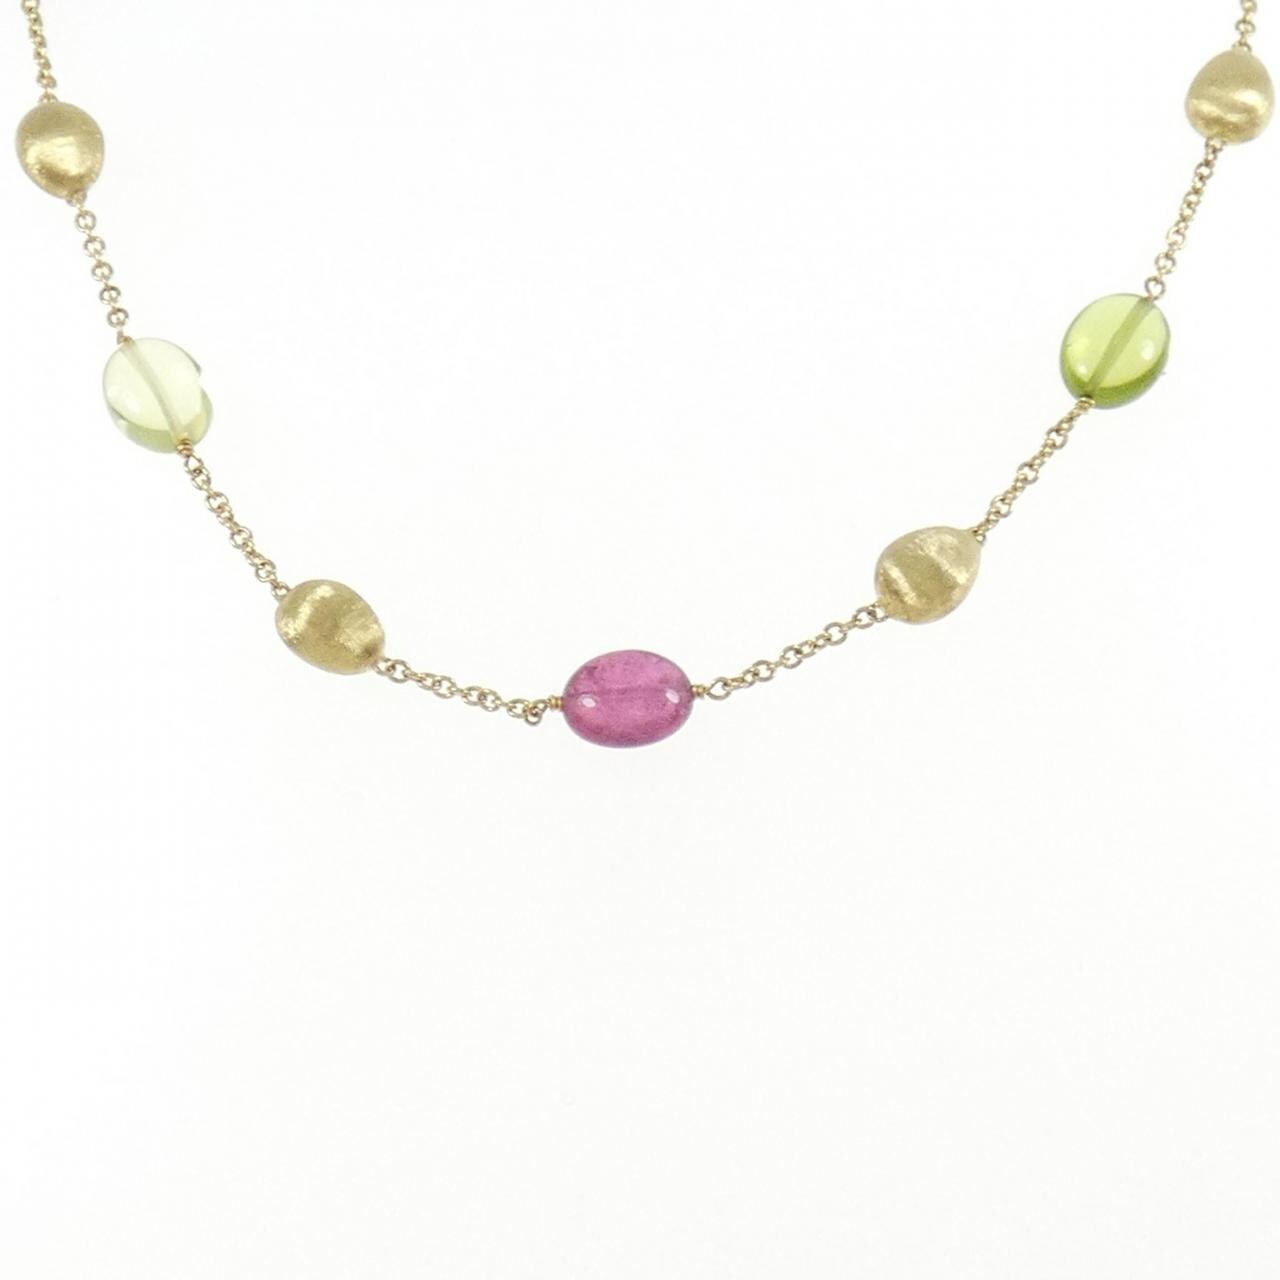 MARCO BICEGO Colored Stone Necklace